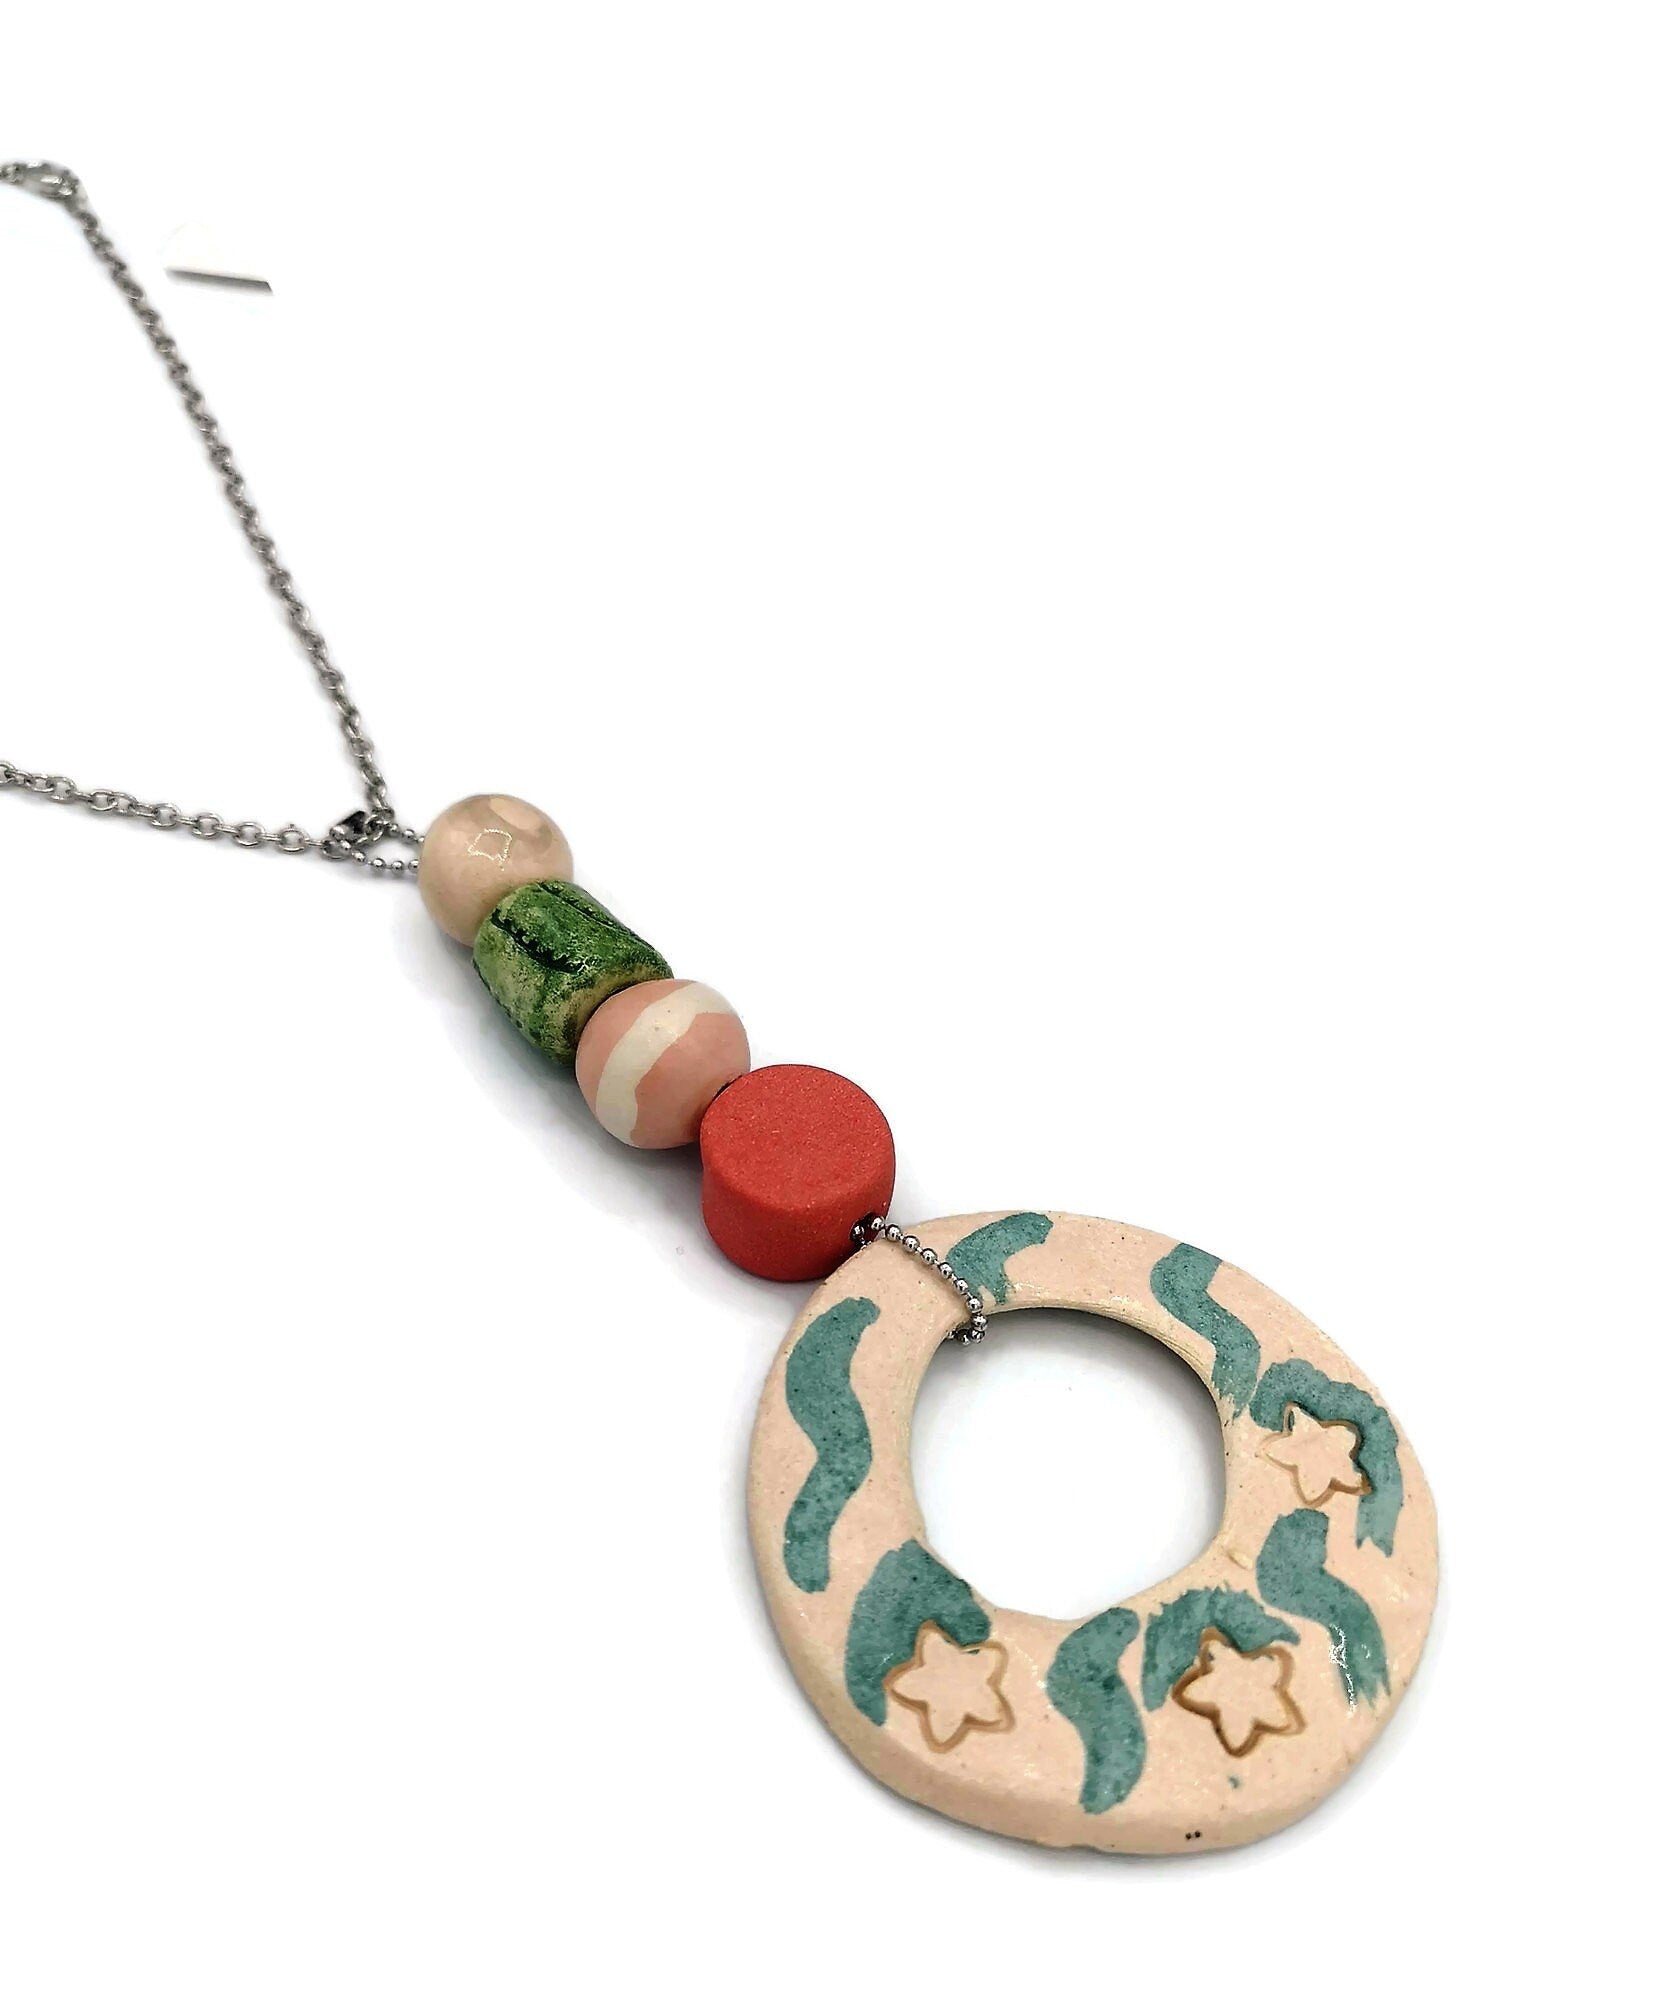 Trendy Statement Pendant Necklace For Women, Aesthetic Long Boho Aesthetic Necklace Best Gift For Her, Maximalist Handmade Ceramic Jewelry - Ceramica Ana Rafael